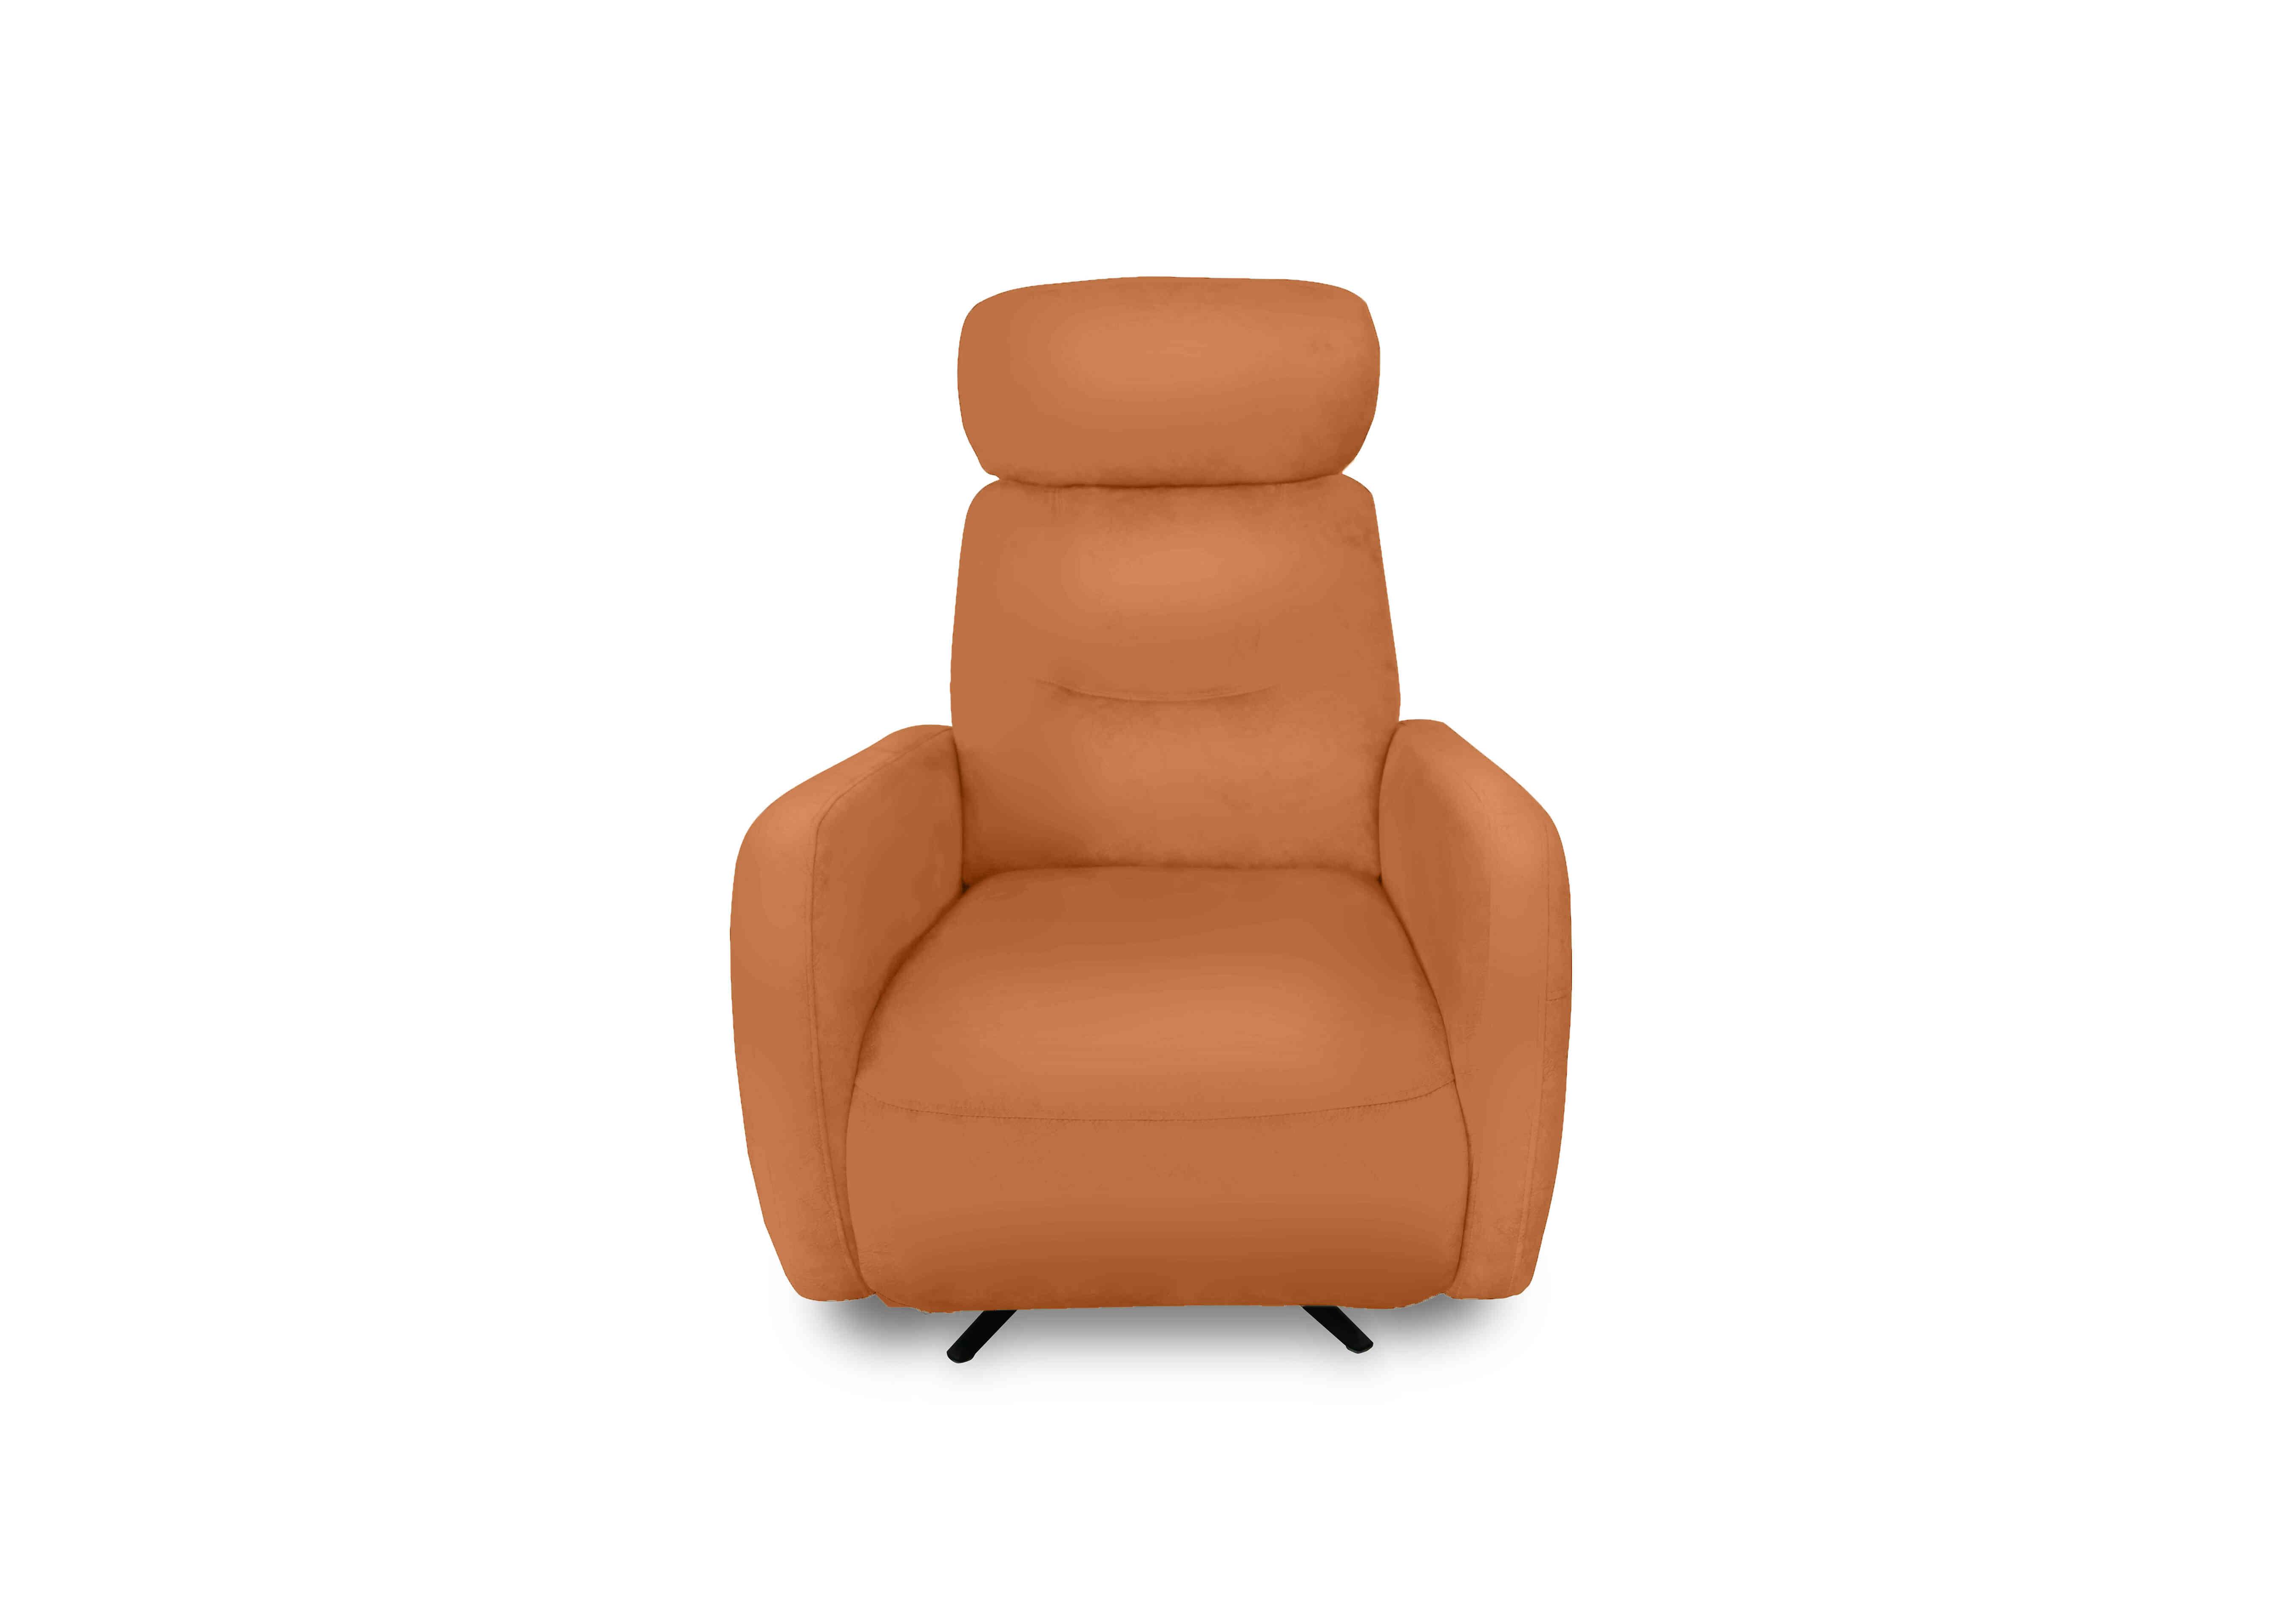 Designer Chair Collection Tokyo Leather Manual Recliner Swivel Chair in Bv-335e Honey Yellow on Furniture Village